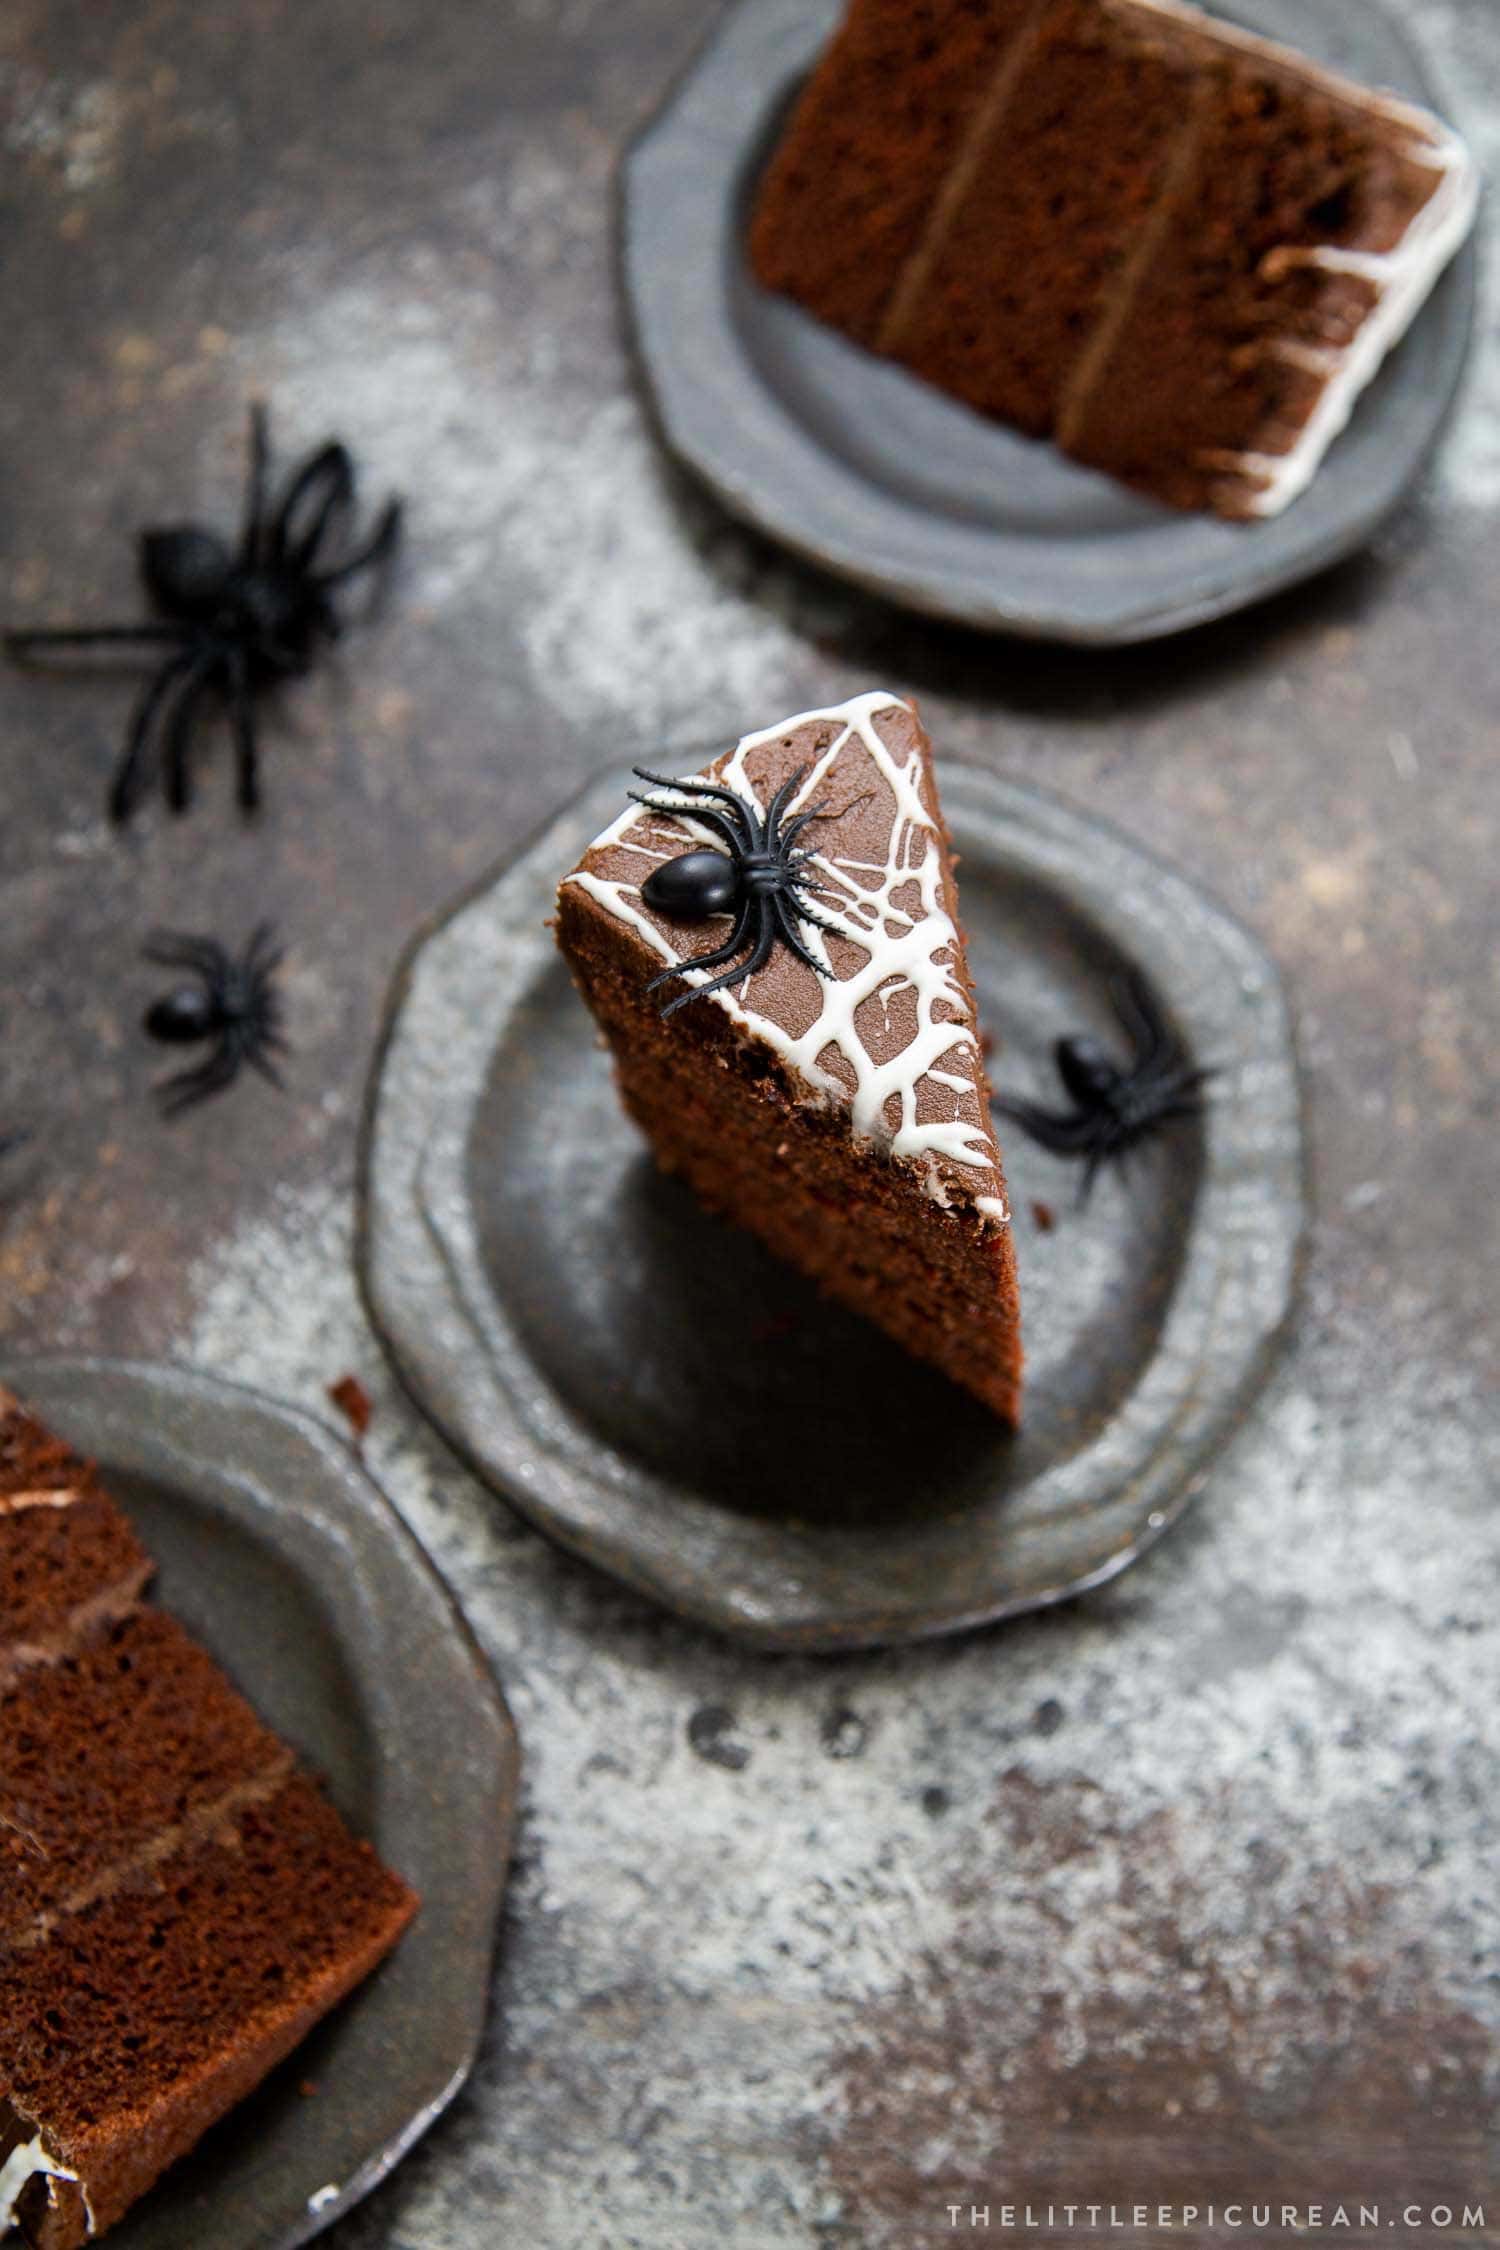 Chocolate Spider Web Cake. Three layer chocolate cake frosted with simple chocolate buttercream and decorated with marshmallow spider webs. It's the perfect Halloween treat!